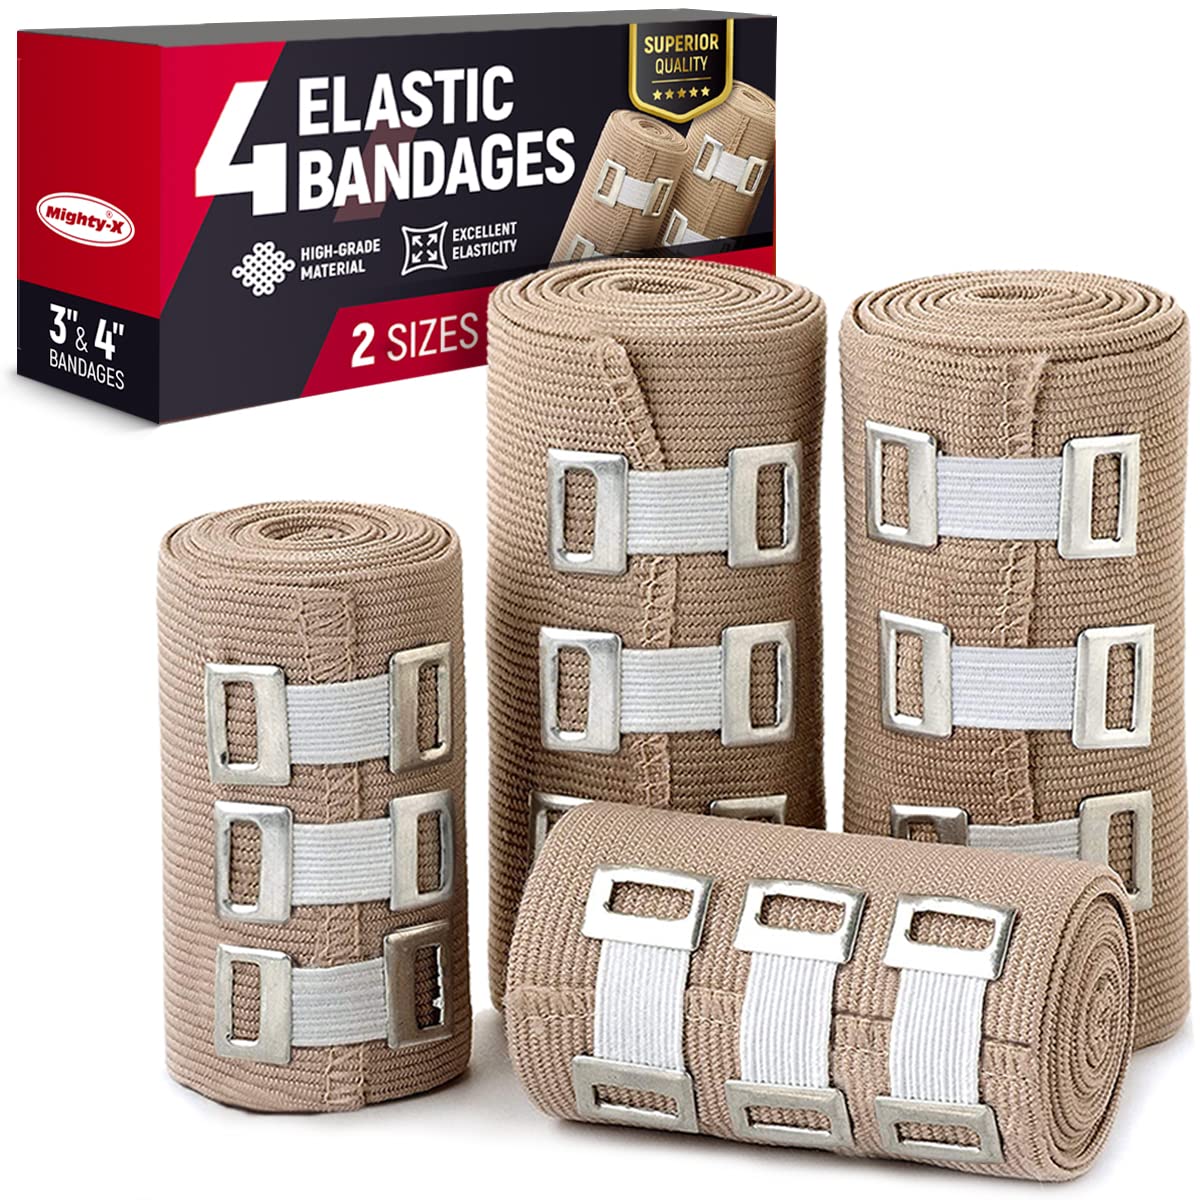 Premium Compression Bandage - Pack of 4 - (2 x 7.5cm + 2 x 10cm) - Durable Elastic Bandage Wrap + 12 Extra Clips - Stretches up to 4.6m